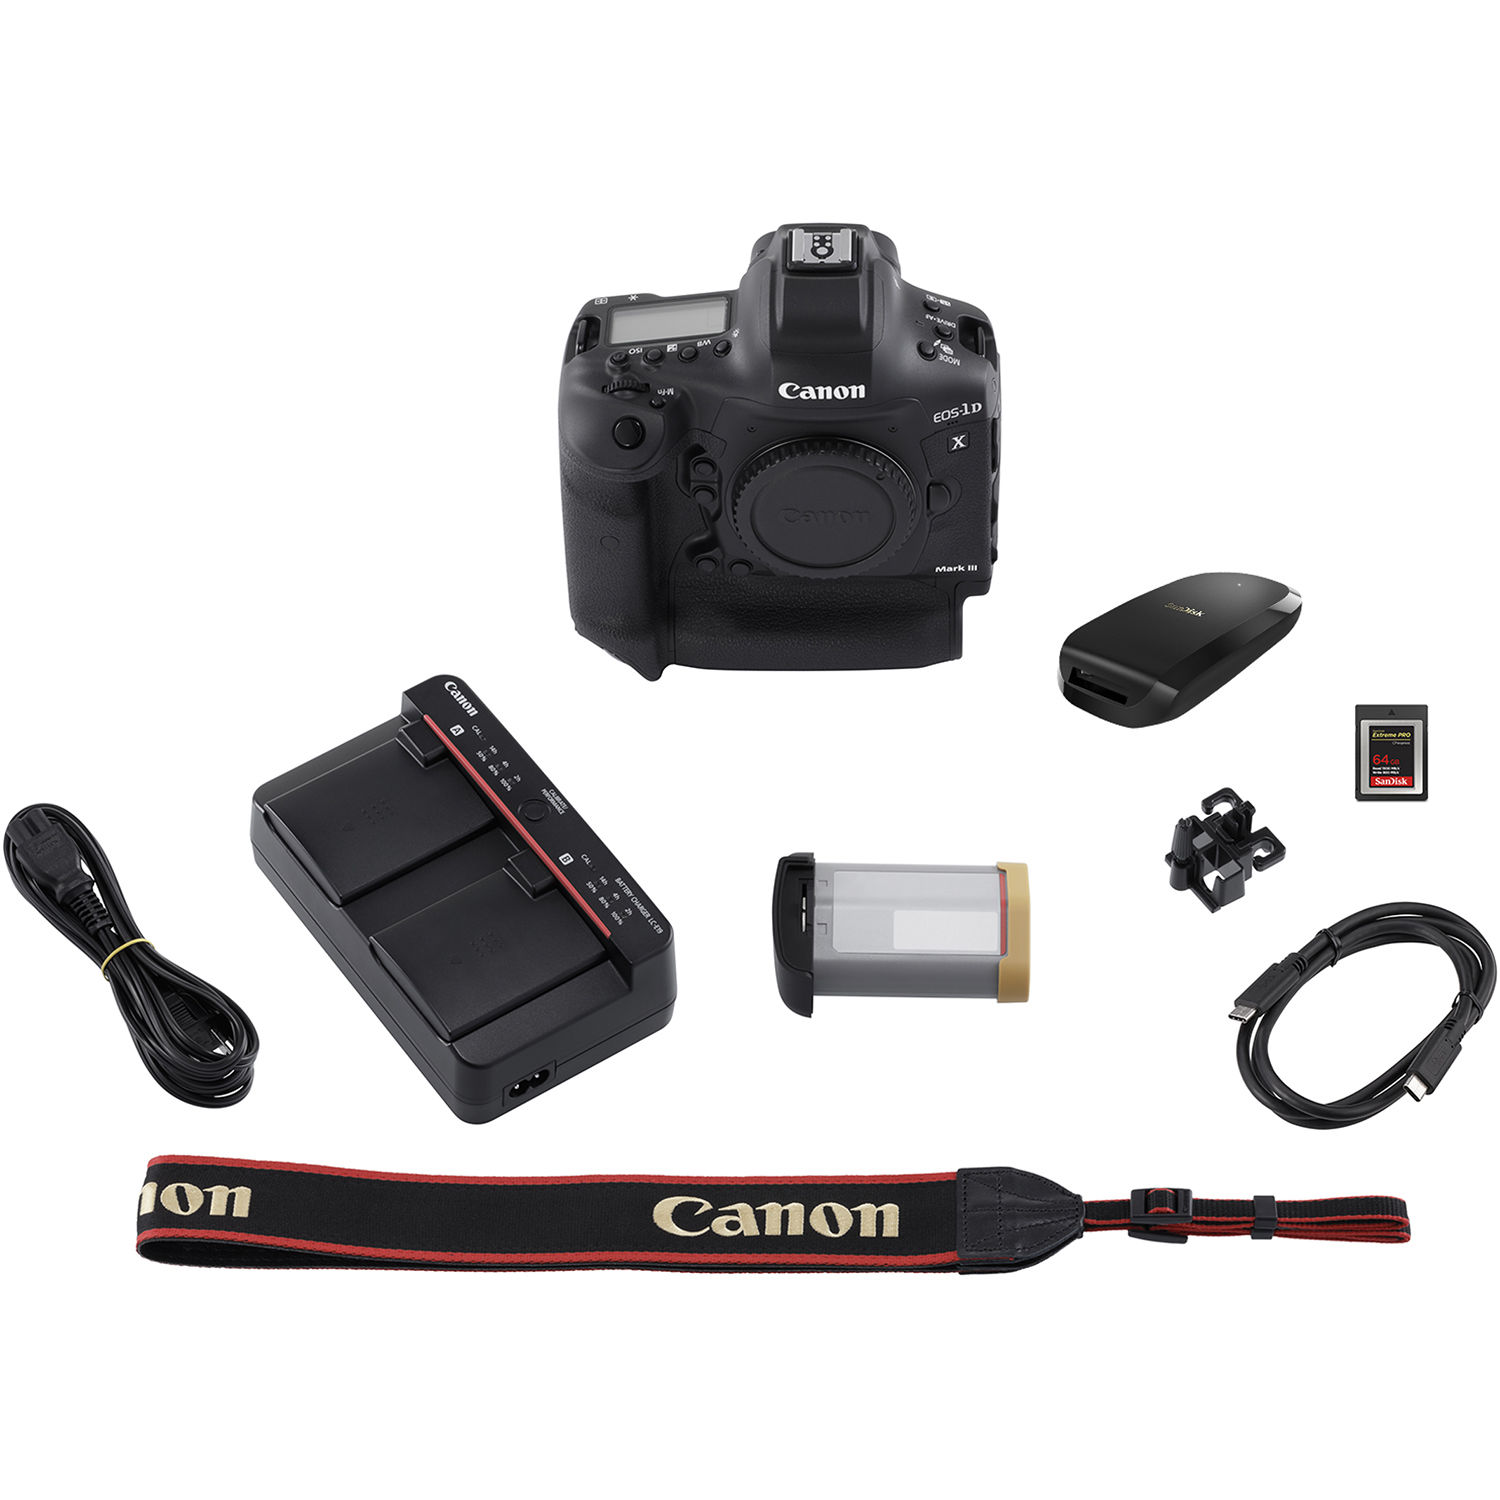 Canon Eos 1d X Mark Iii Dslr Camera With Cfexpress Card 39c019